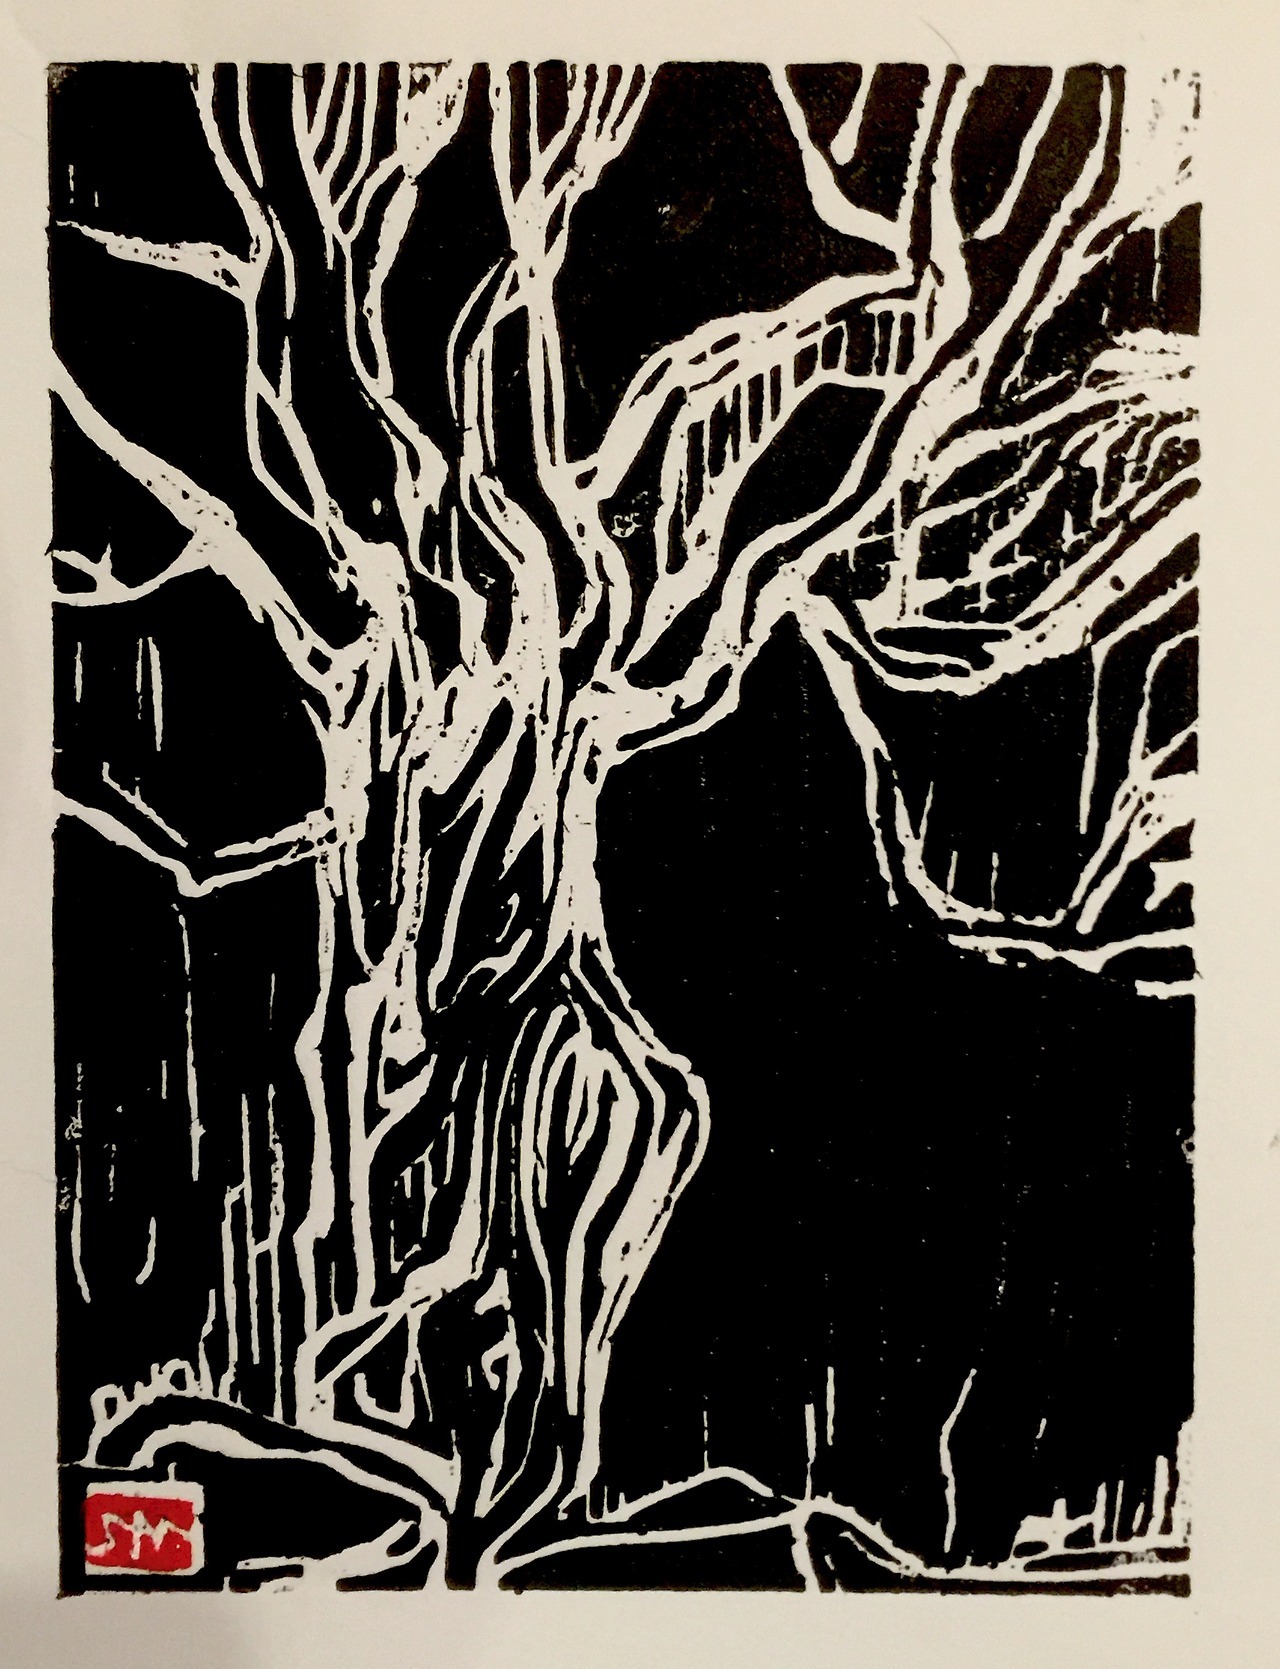 “Olive Tree” Woodcut Print. 11x14" — Immediately post your art to a topic and get feedback. Join our new community, EatSleepDraw Studio, today!